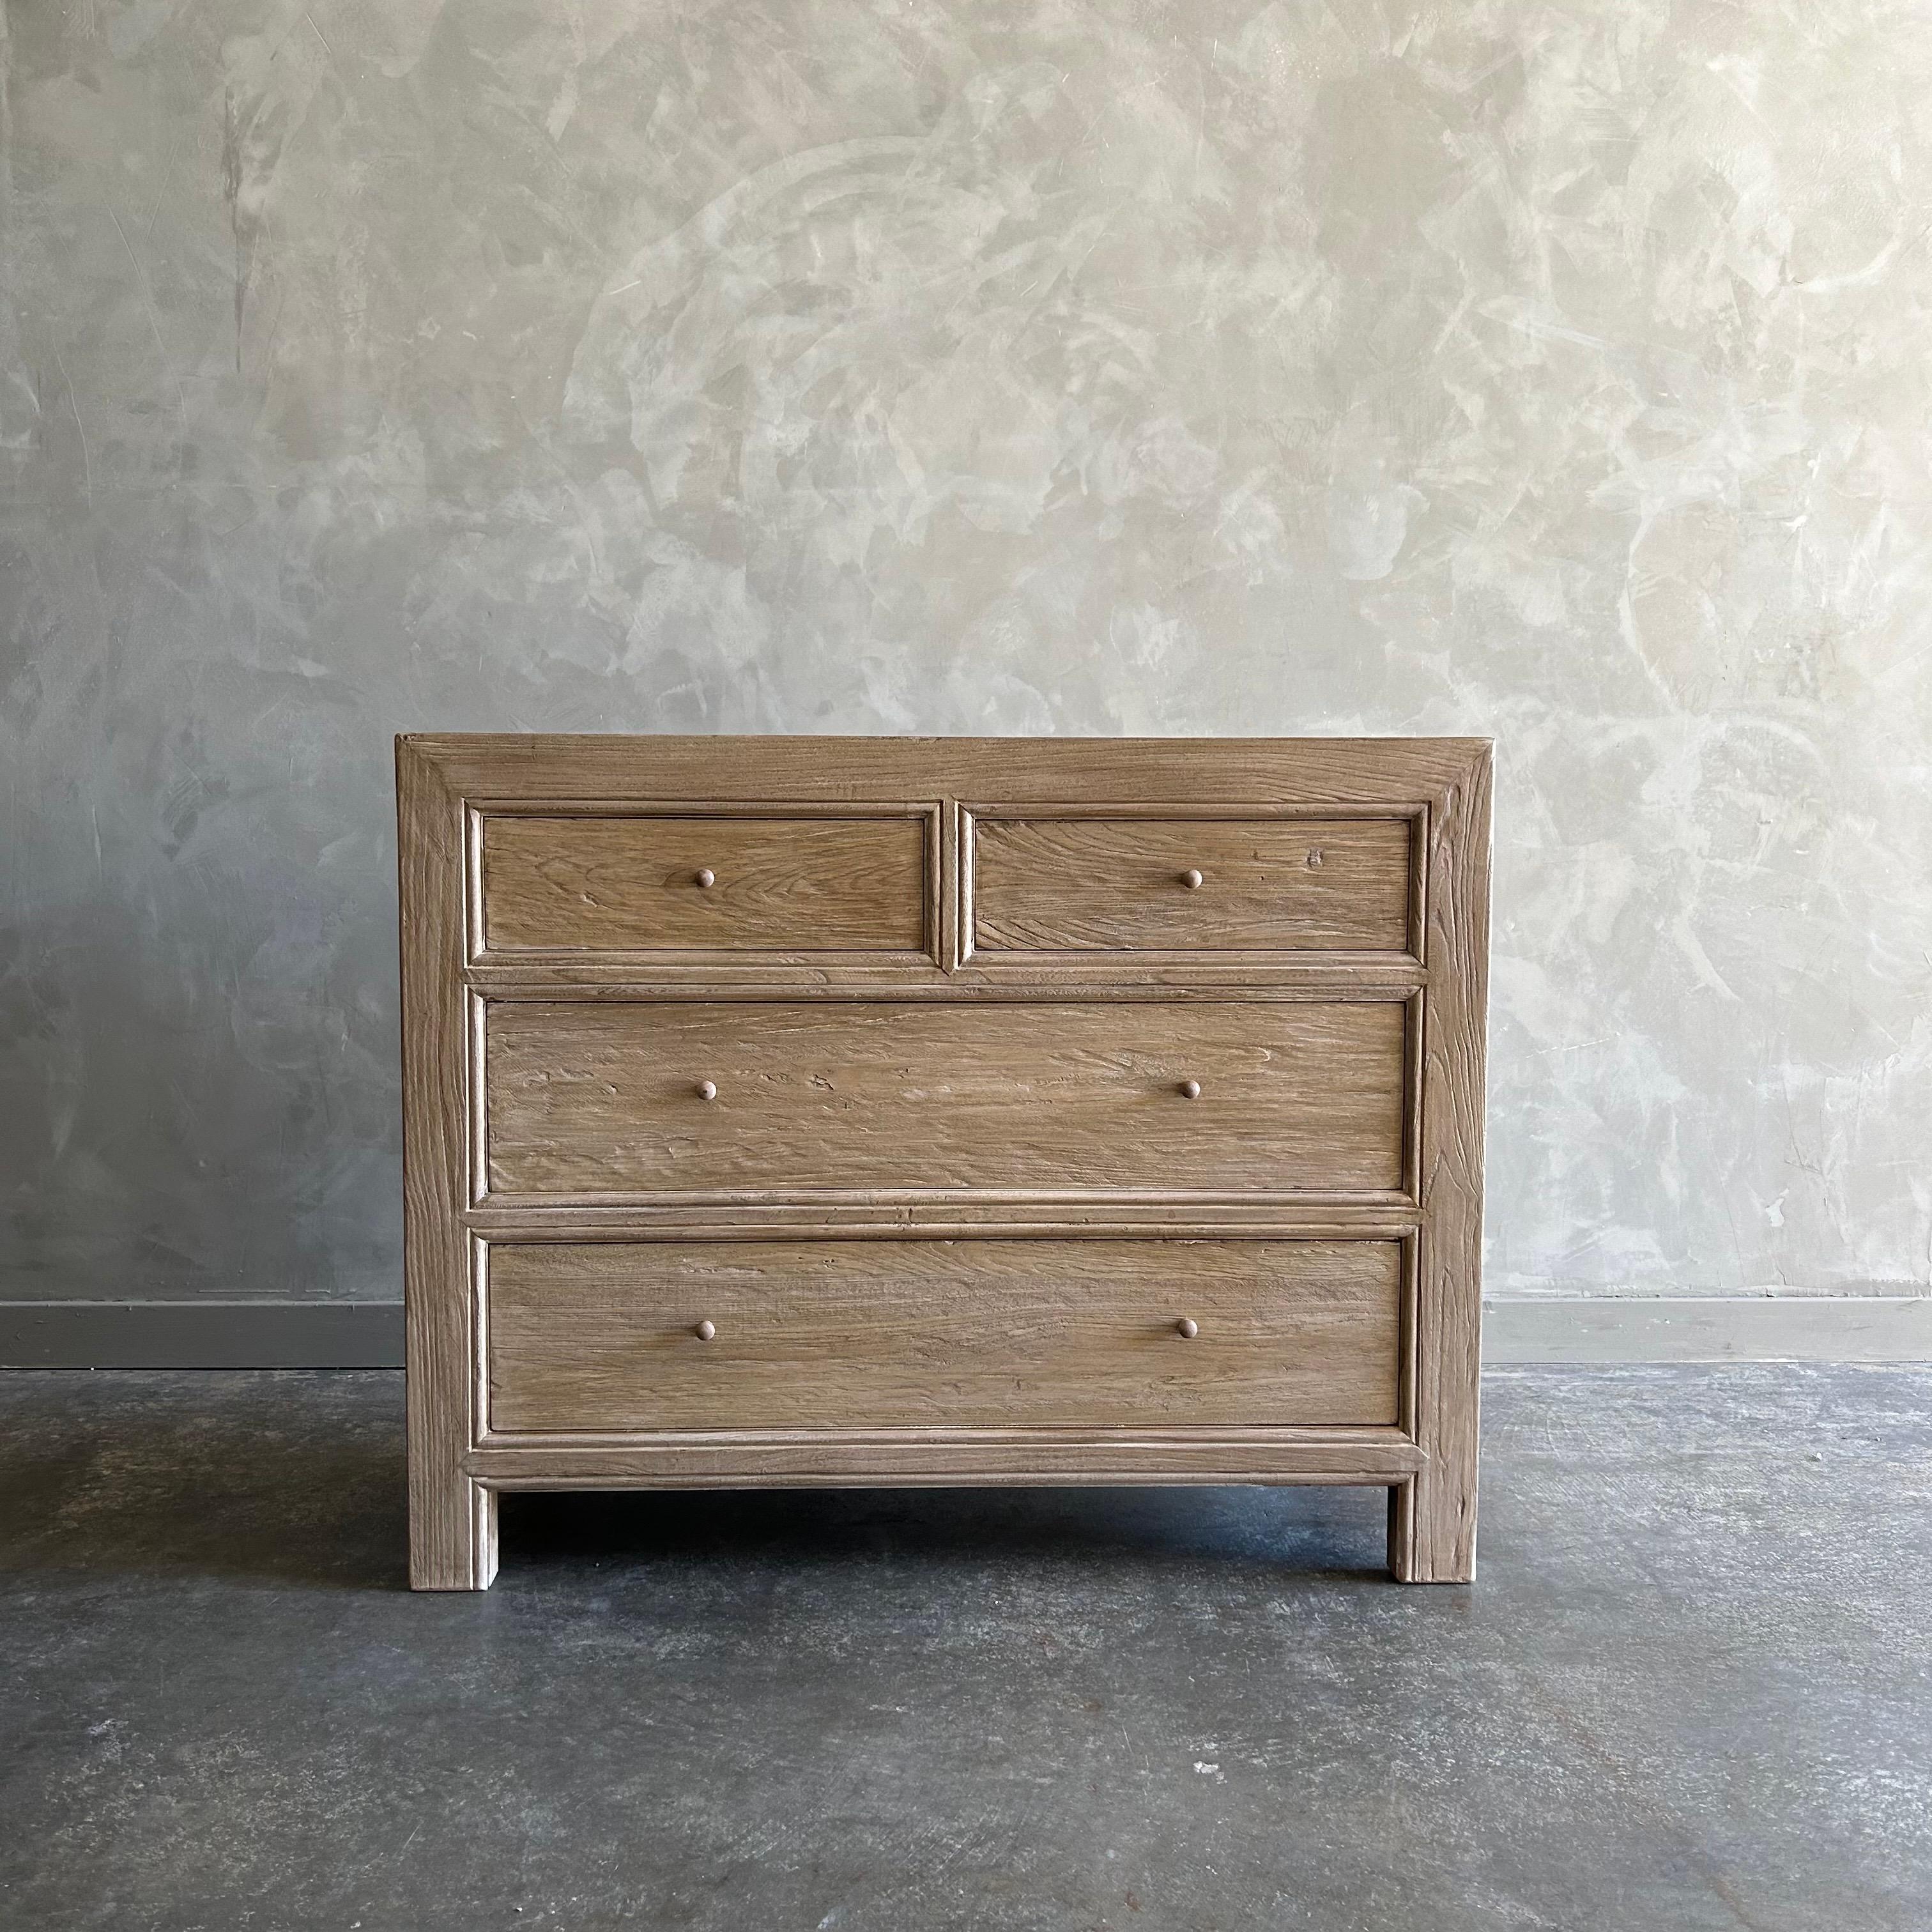 Our dresser is custom made from reclaimed elm wood in a natural finish.
 The eco-friendly dresser, is a great additional to any space. Experience the beauty of reclaimed wood while enjoying the convenience of abundant storage.
Dovetail construction